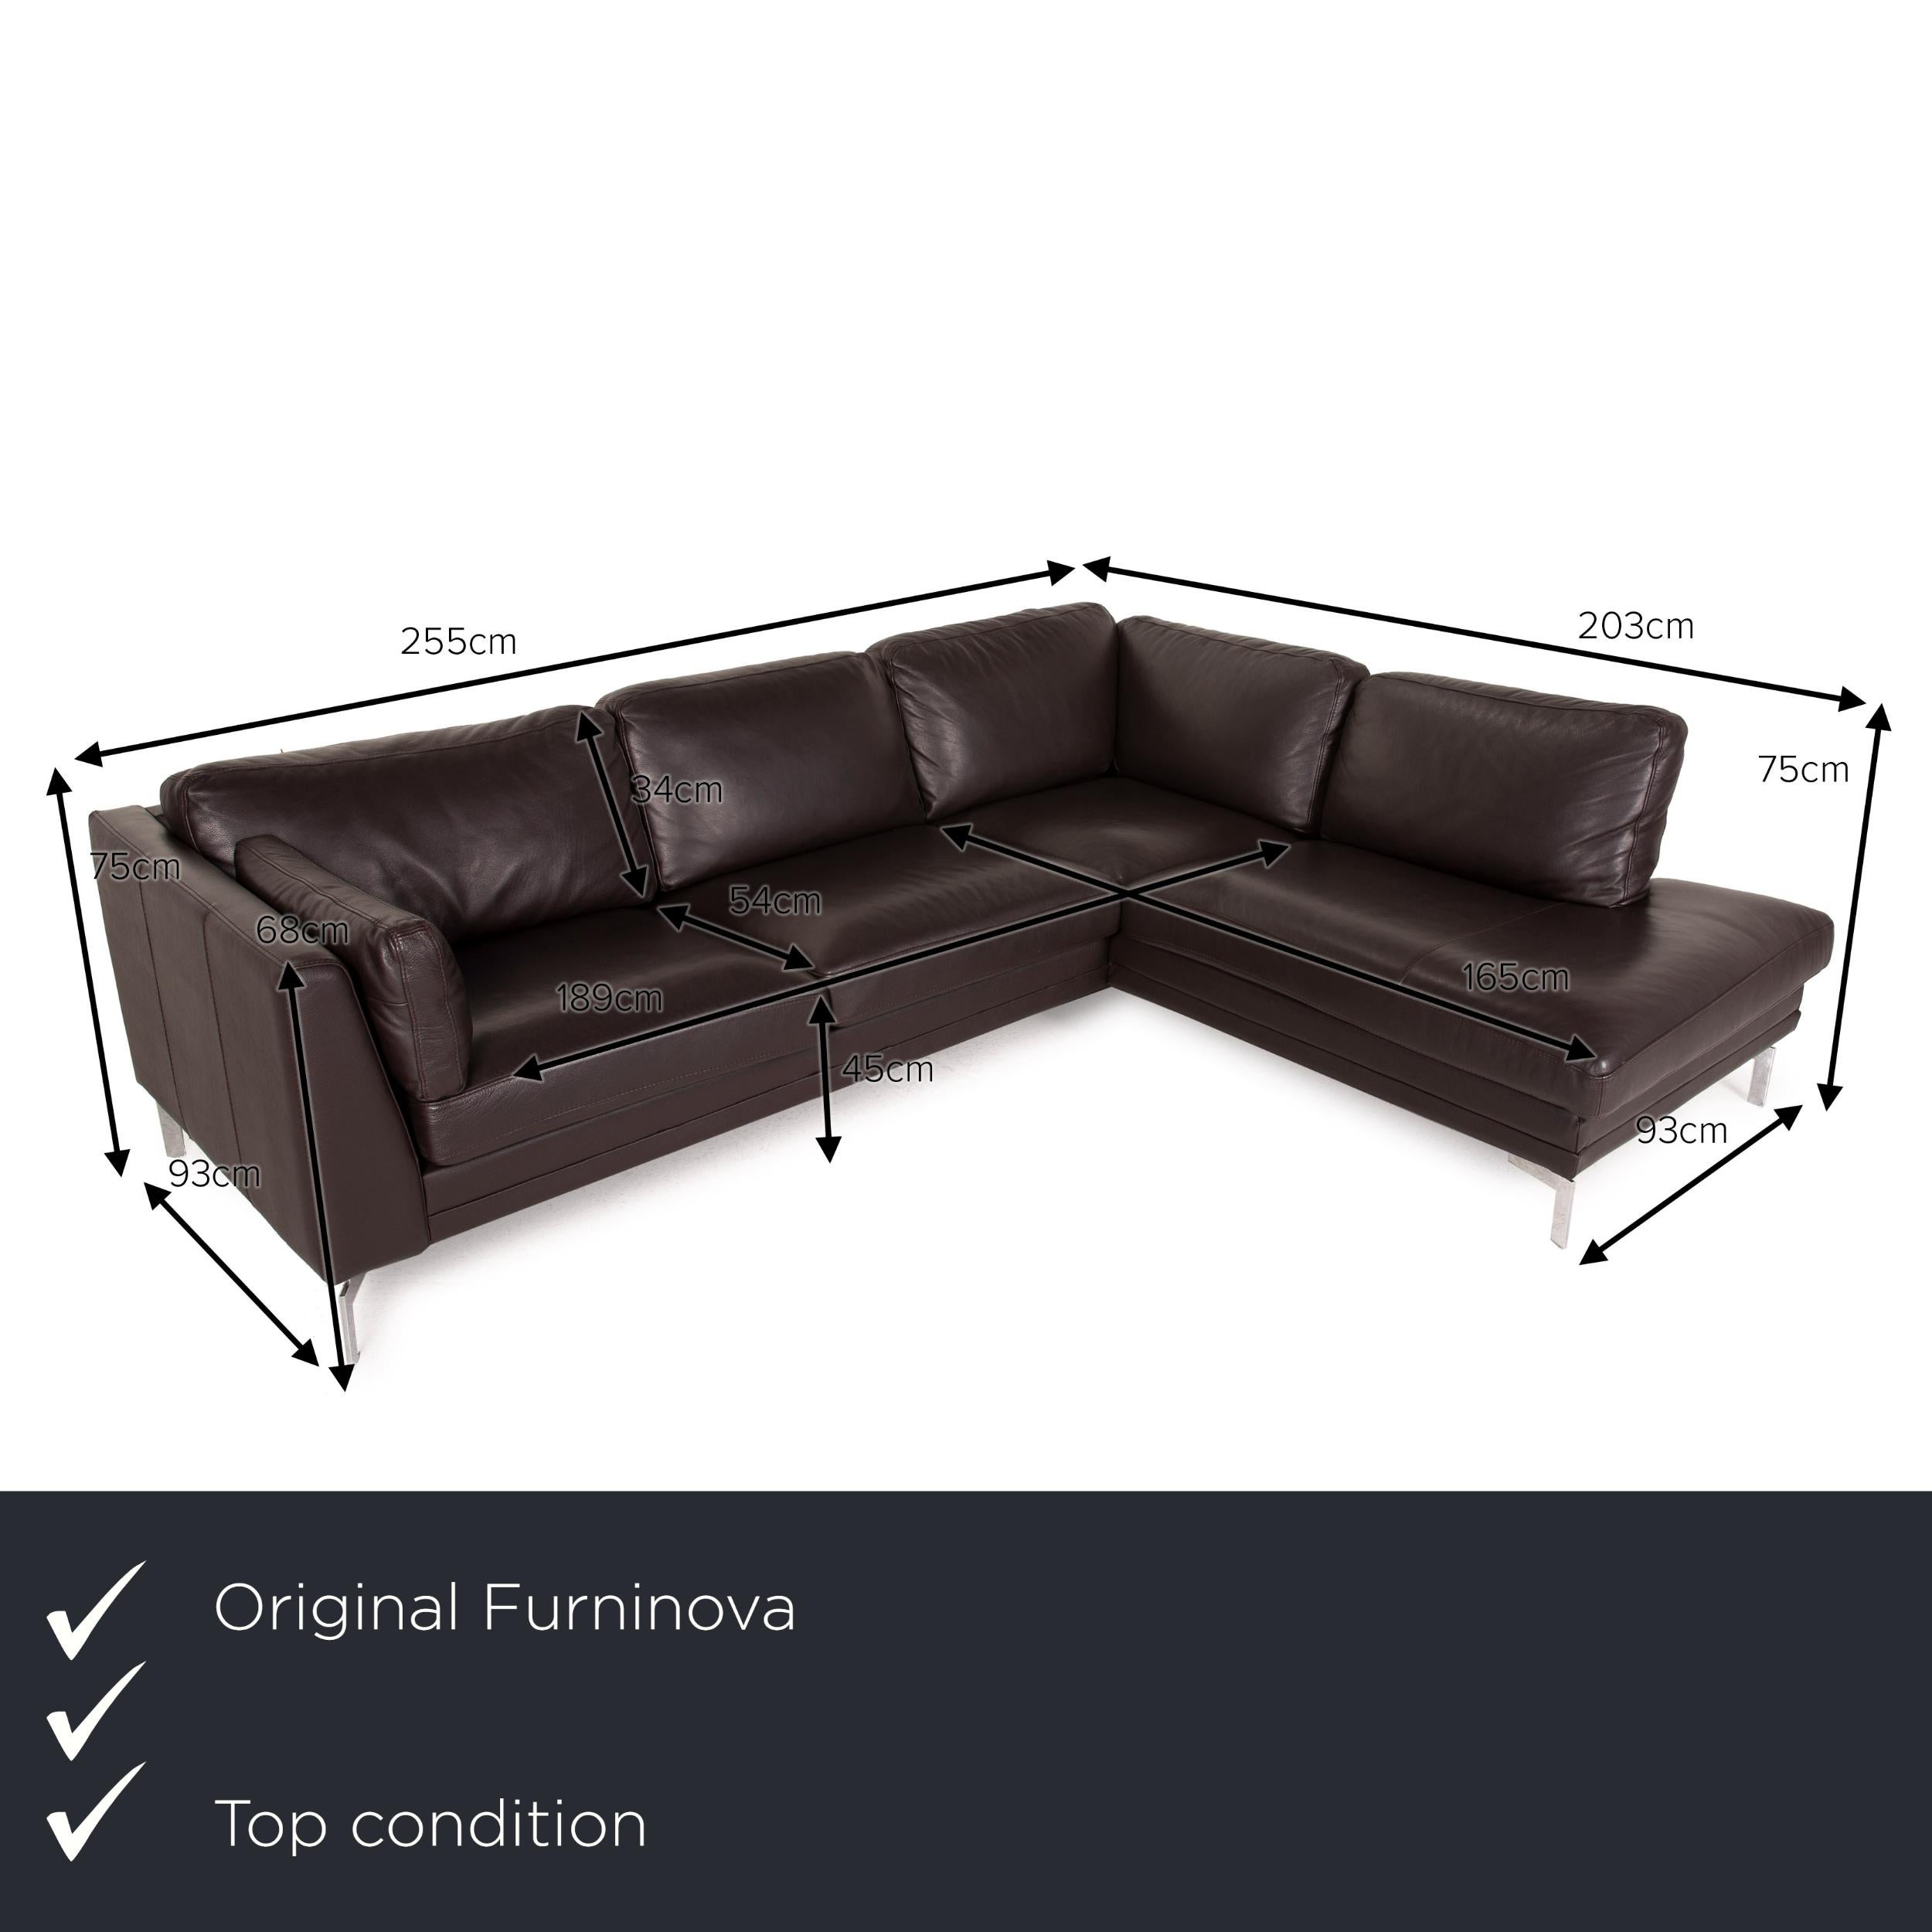 We present to you a Furninova leather sofa dark brown corner sofa couch.
 SKU: #16921-c4
 

 Product measurements in centimeters:
 

 depth: 93
 width: 203
 height: 75
 seat height: 45
 rest height: 68
 seat depth: 54
 seat width: 165
